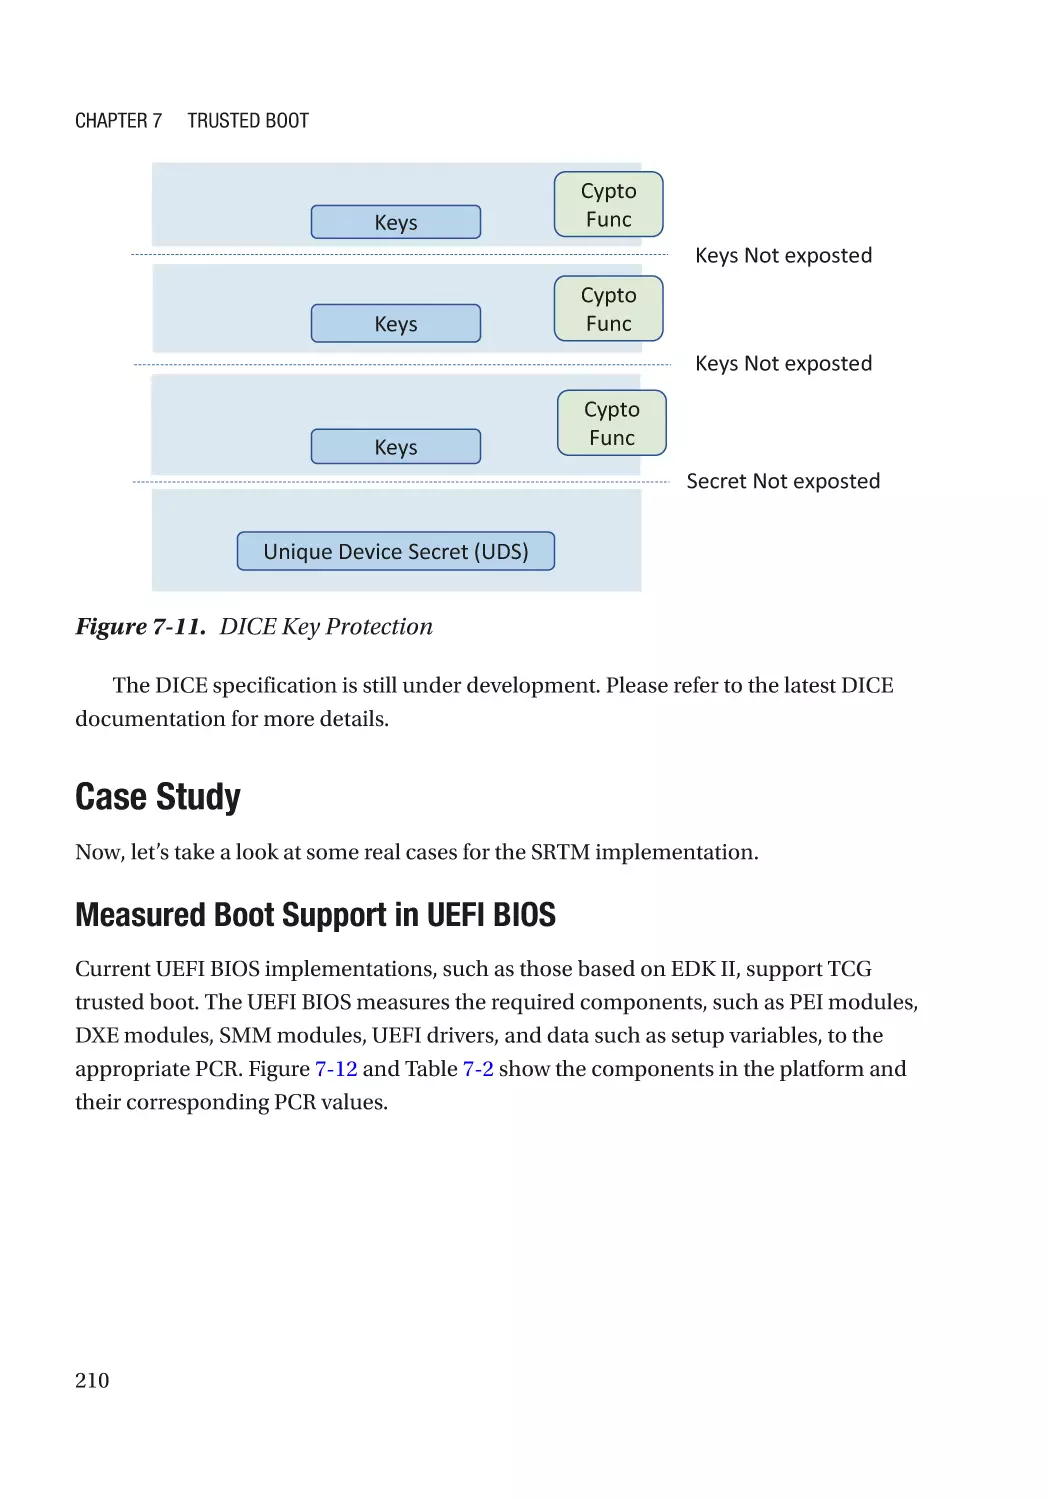 Case Study
Measured Boot Support in UEFI BIOS